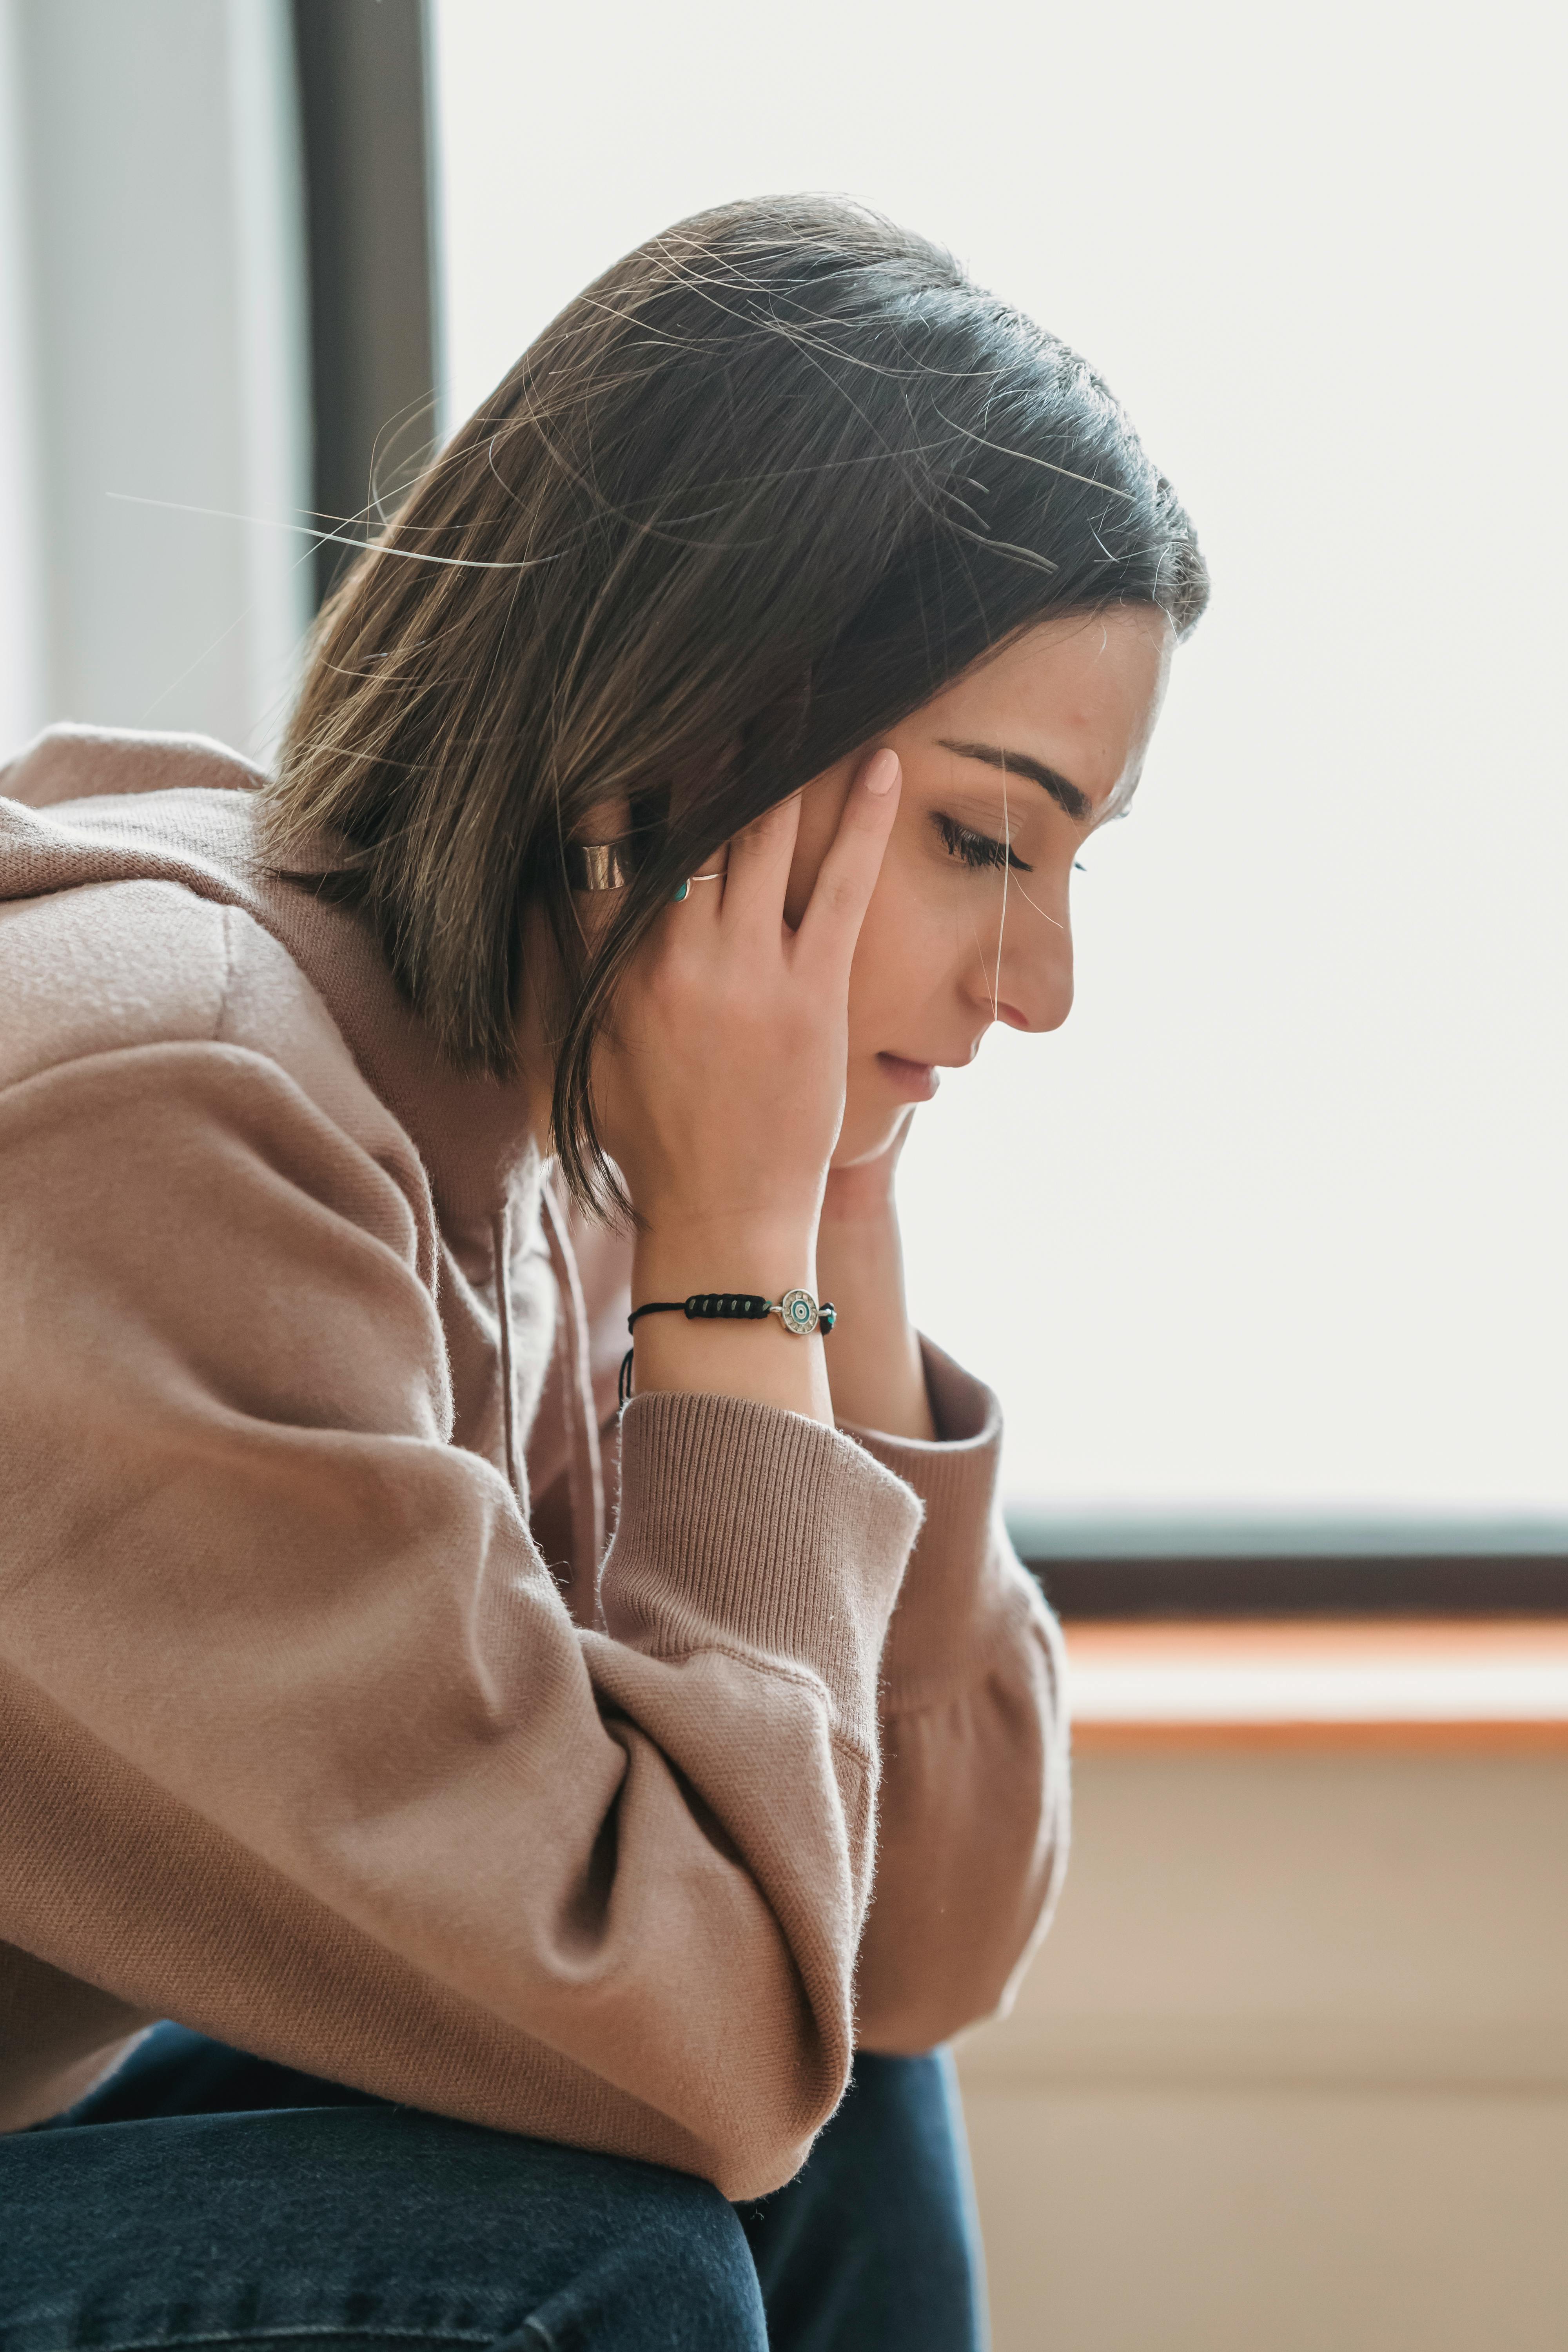 A sad woman with hands on her head | Source: Pexels